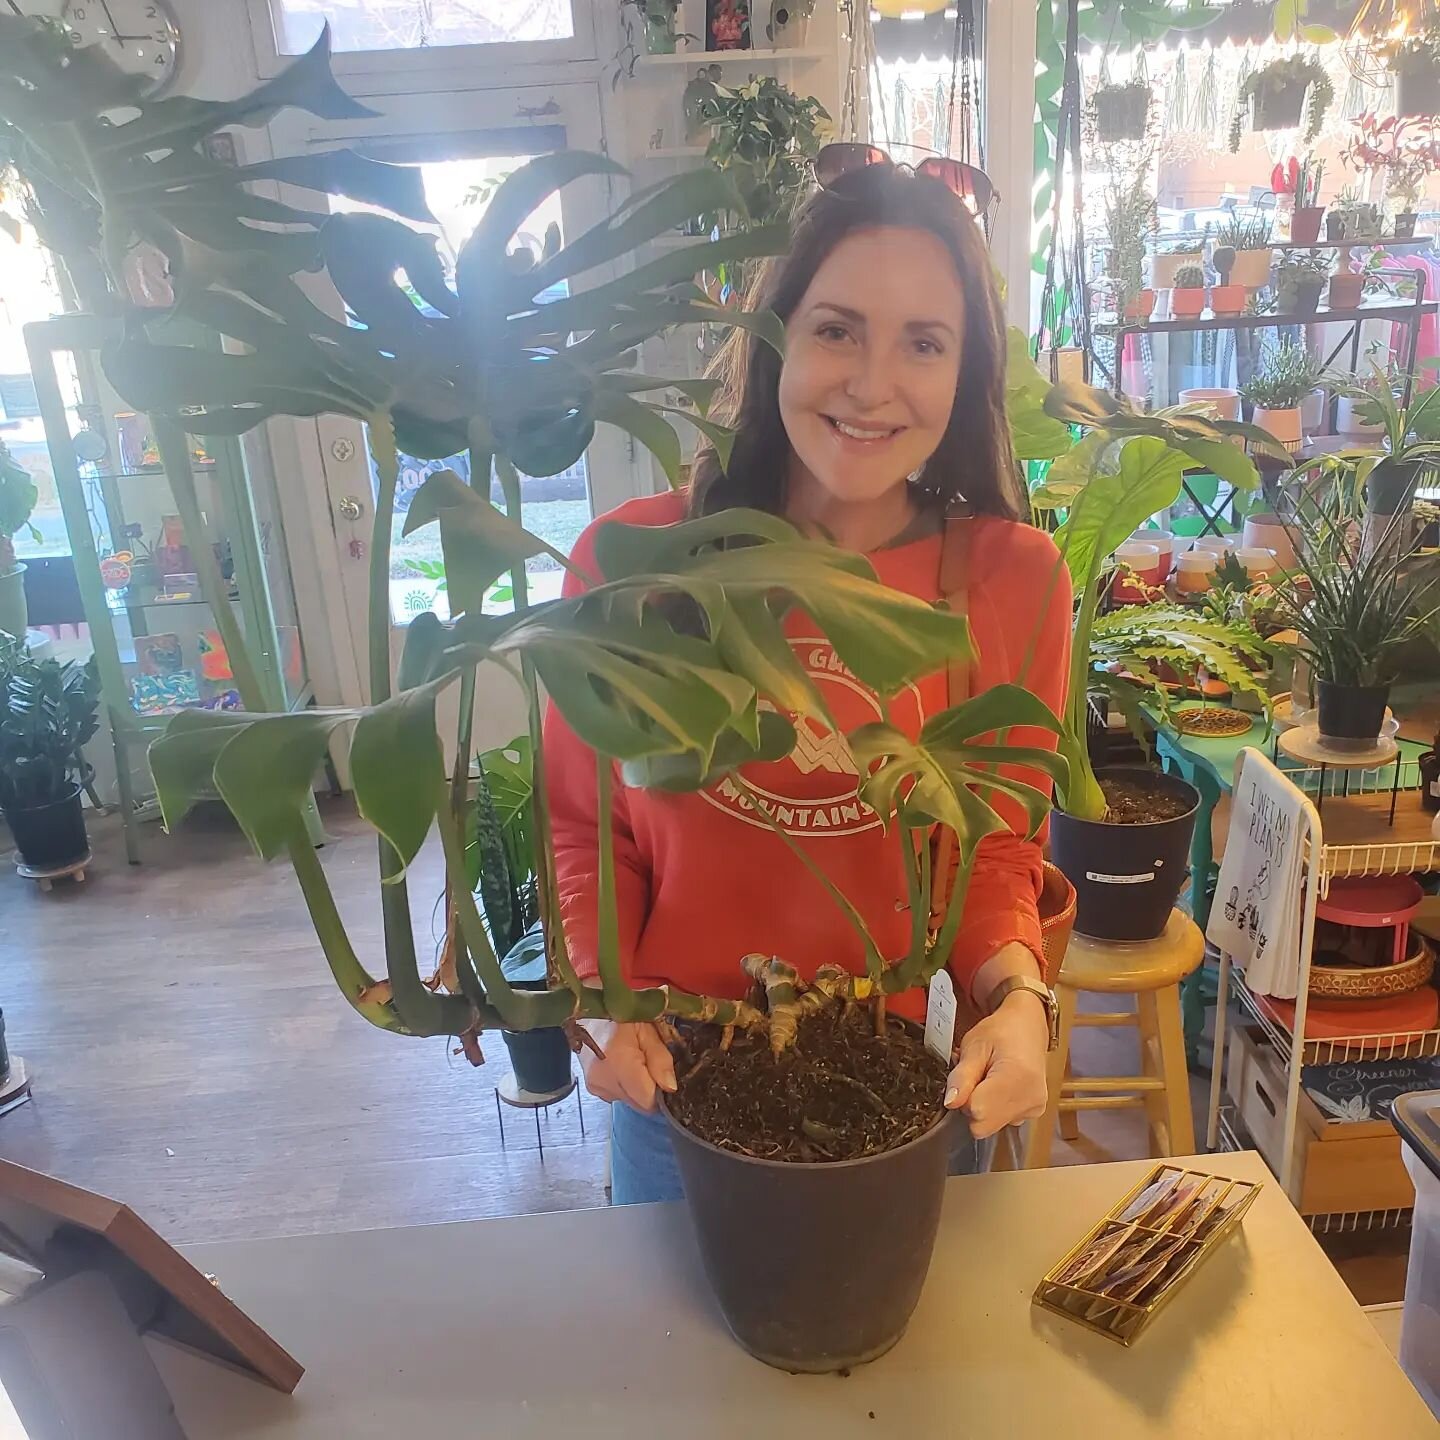 What a better way to celebrate springing forward than filling your home with some magnificent new foliage? Emily snagged this stunning monstera (just check out the elbows on that babe!💚) and it's totally going to transform that empty corner in her l